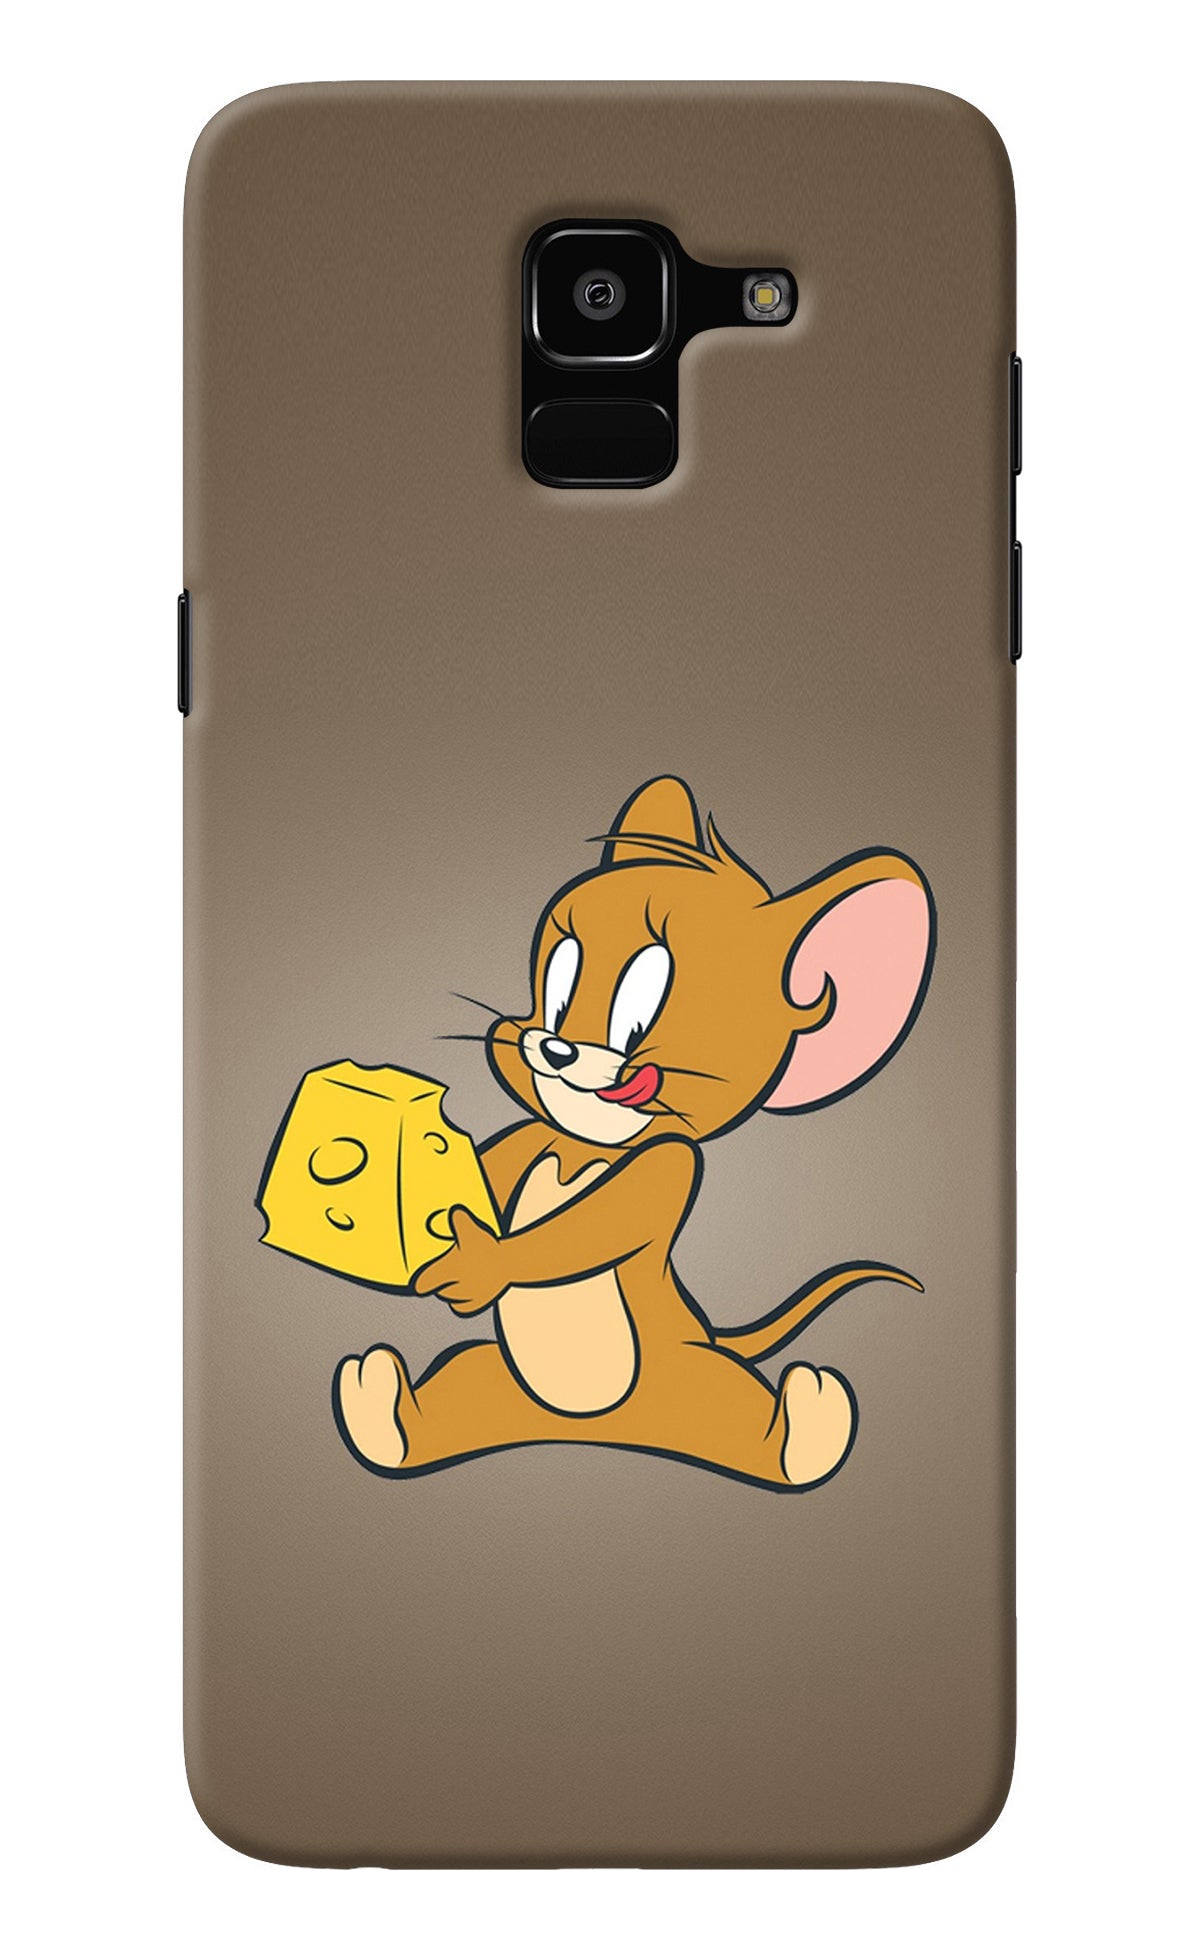 Jerry Samsung J6 Back Cover